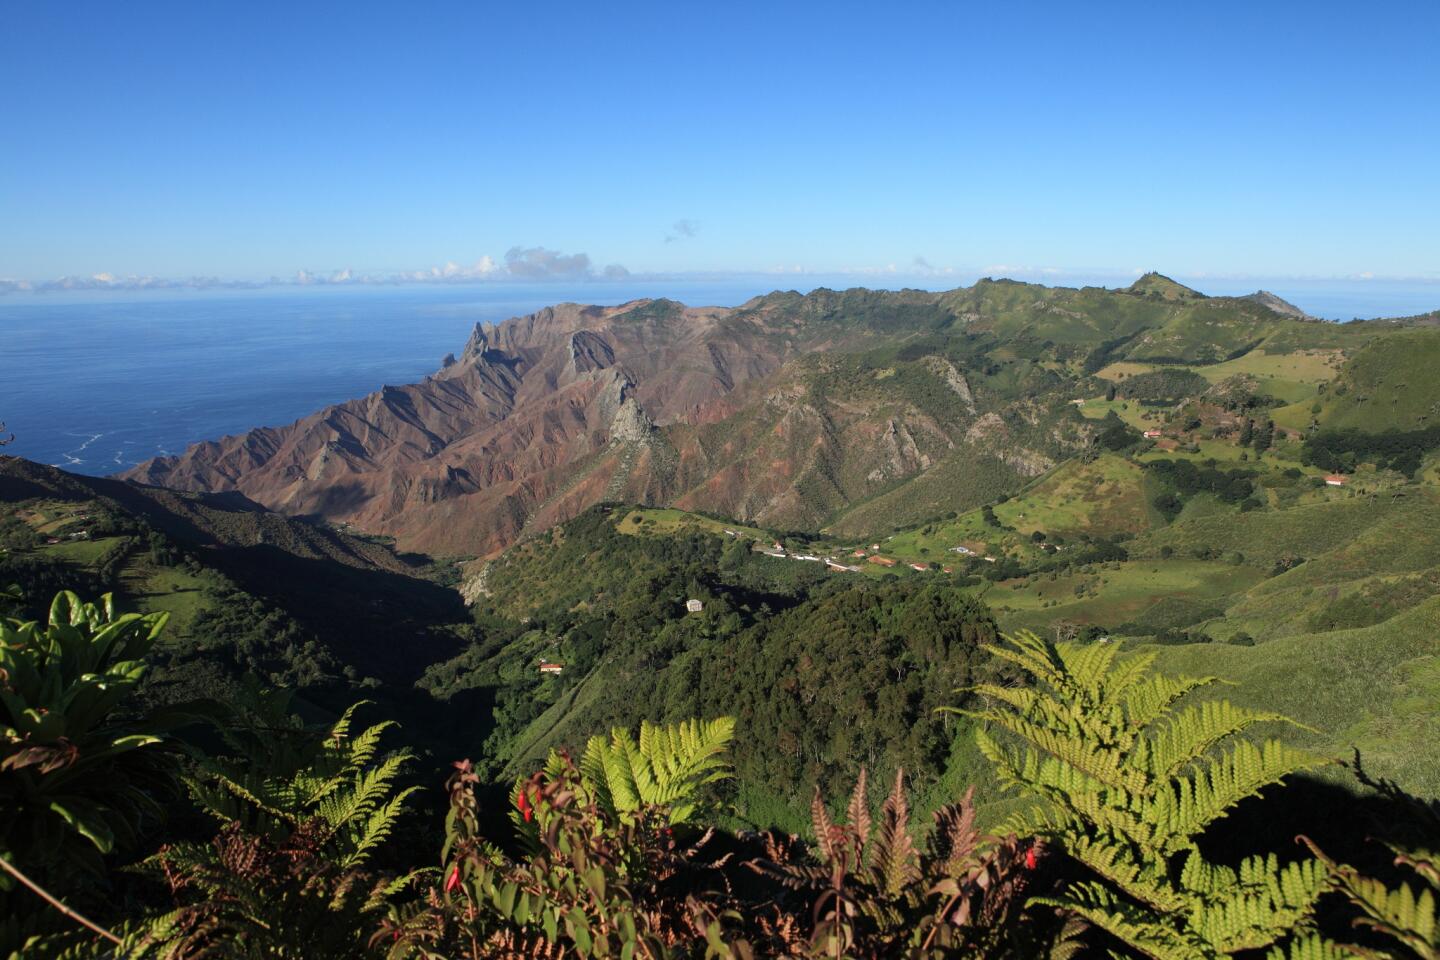 Visit St. Helena in the South Atlantic